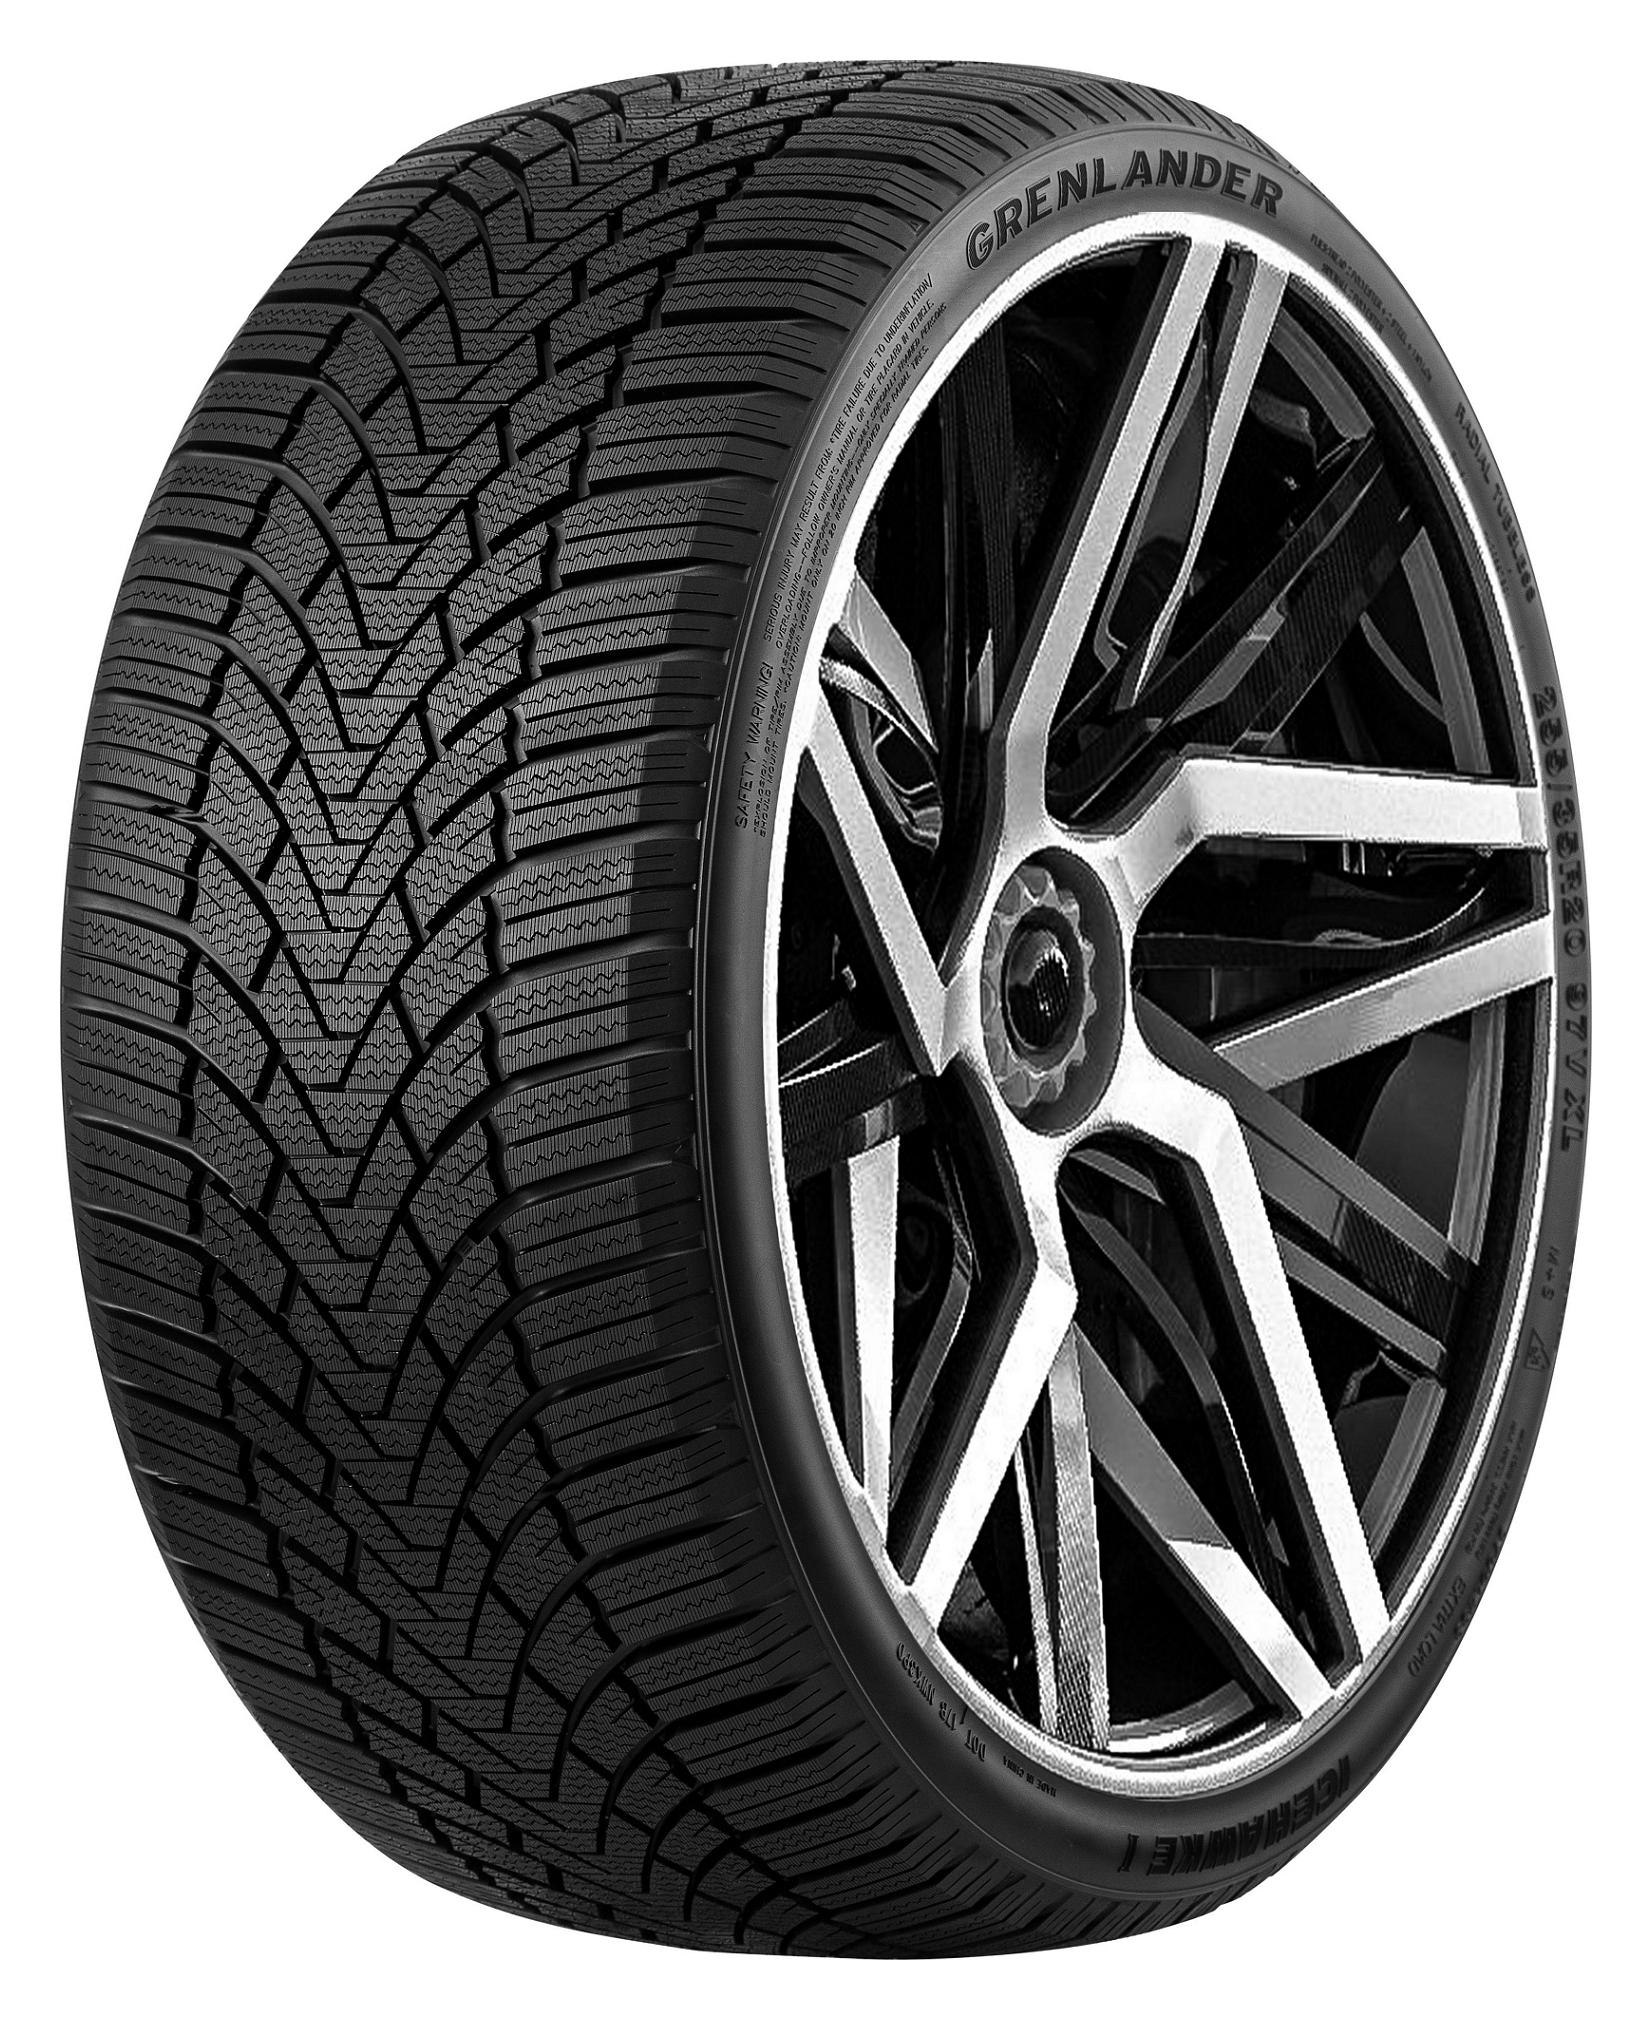 Gomme Nuove Grenlander 235/55 R17 103H Icehawke1 XL M+S pneumatici nuovi Invernale